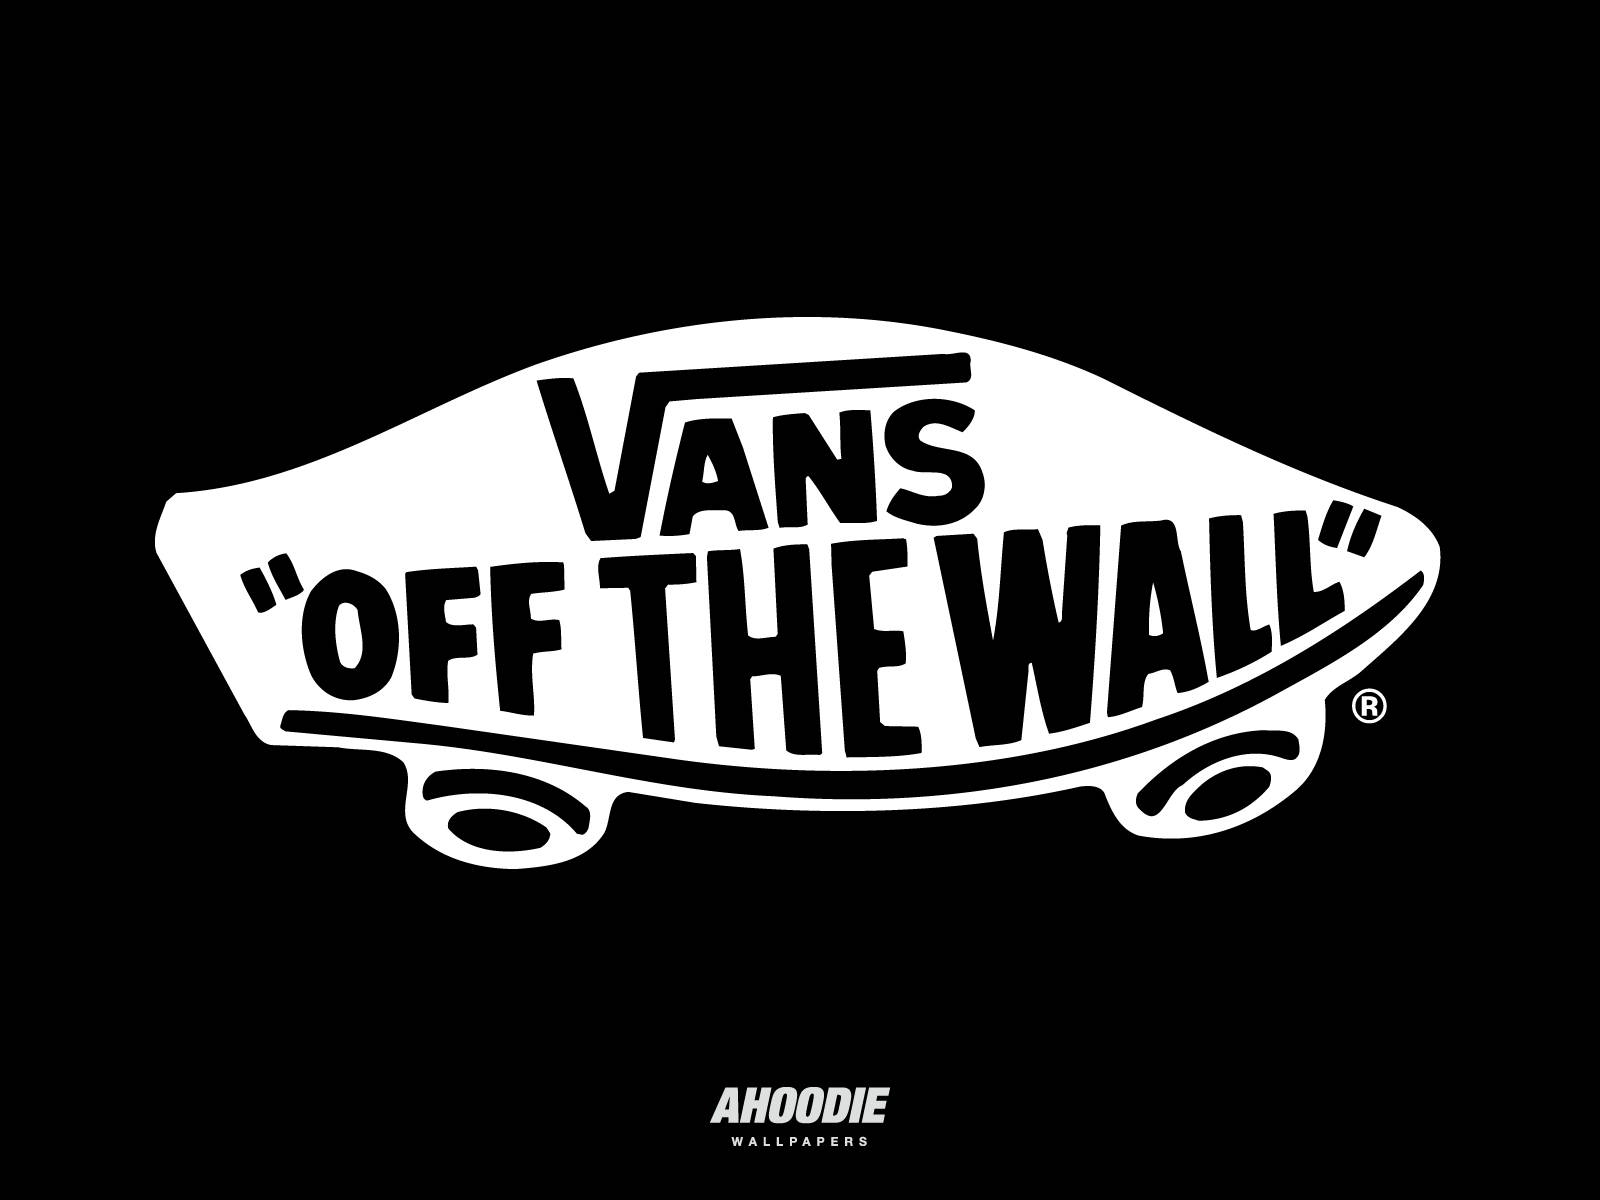 vans: off the wall wallpapers - wallpaper cave